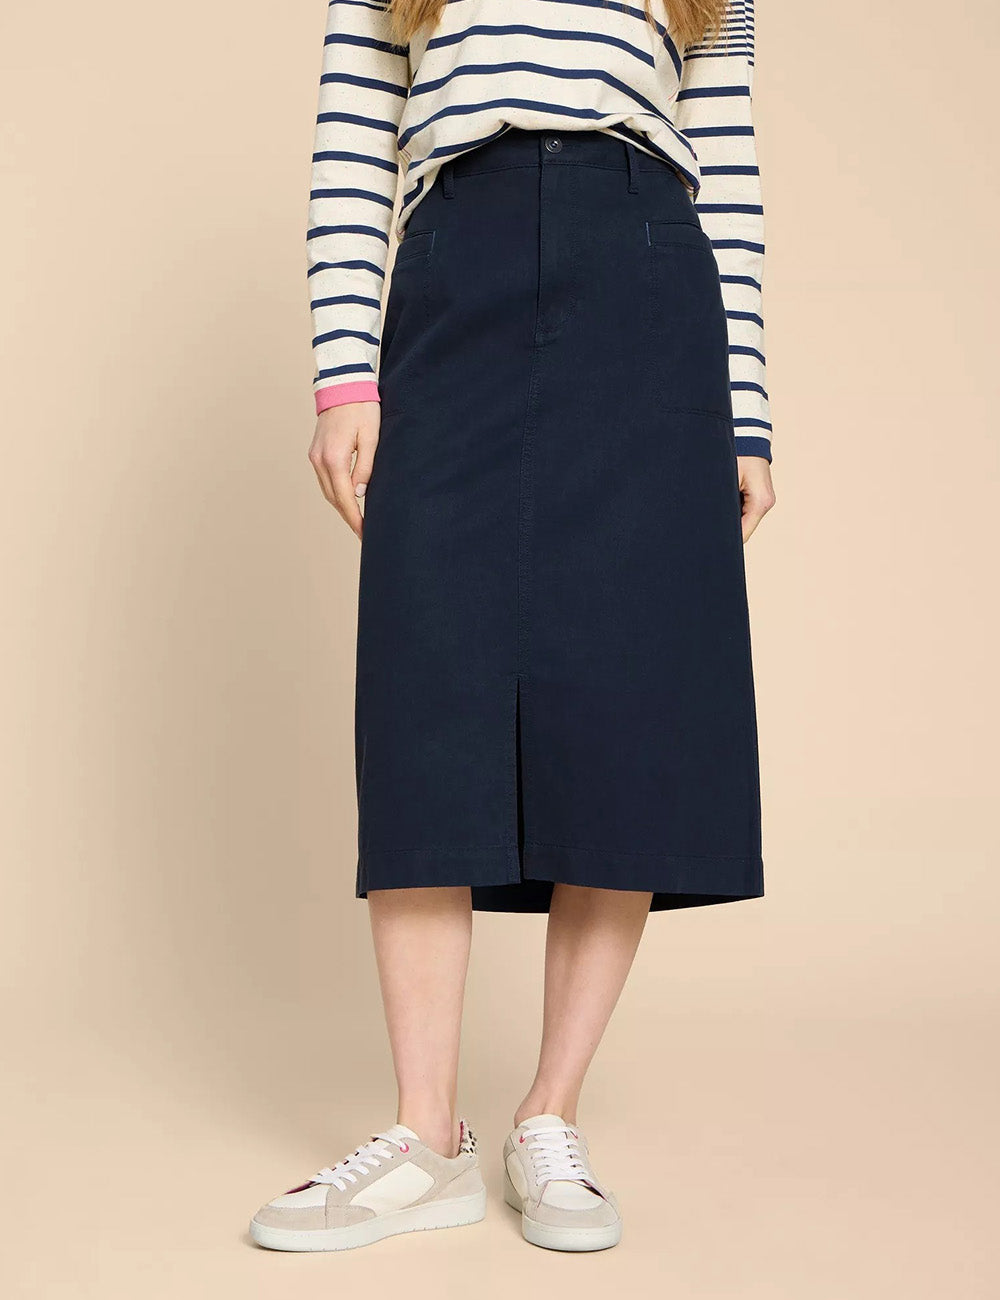 Joules Skirts for Women for sale | eBay